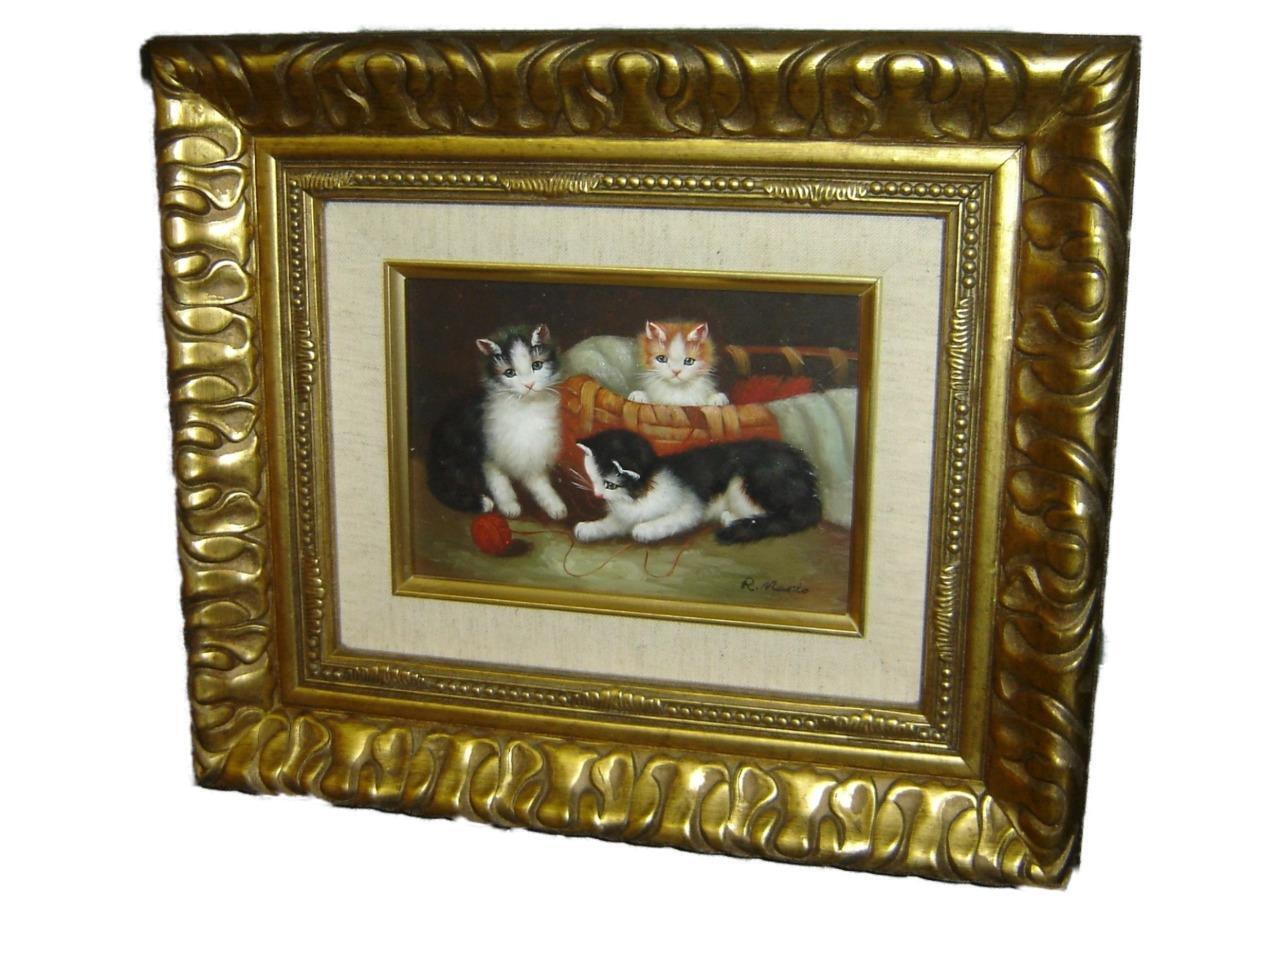 Antique Oil Painting on Board Three Kittens Cats Playing W/ Ball Of Yarn Signed.